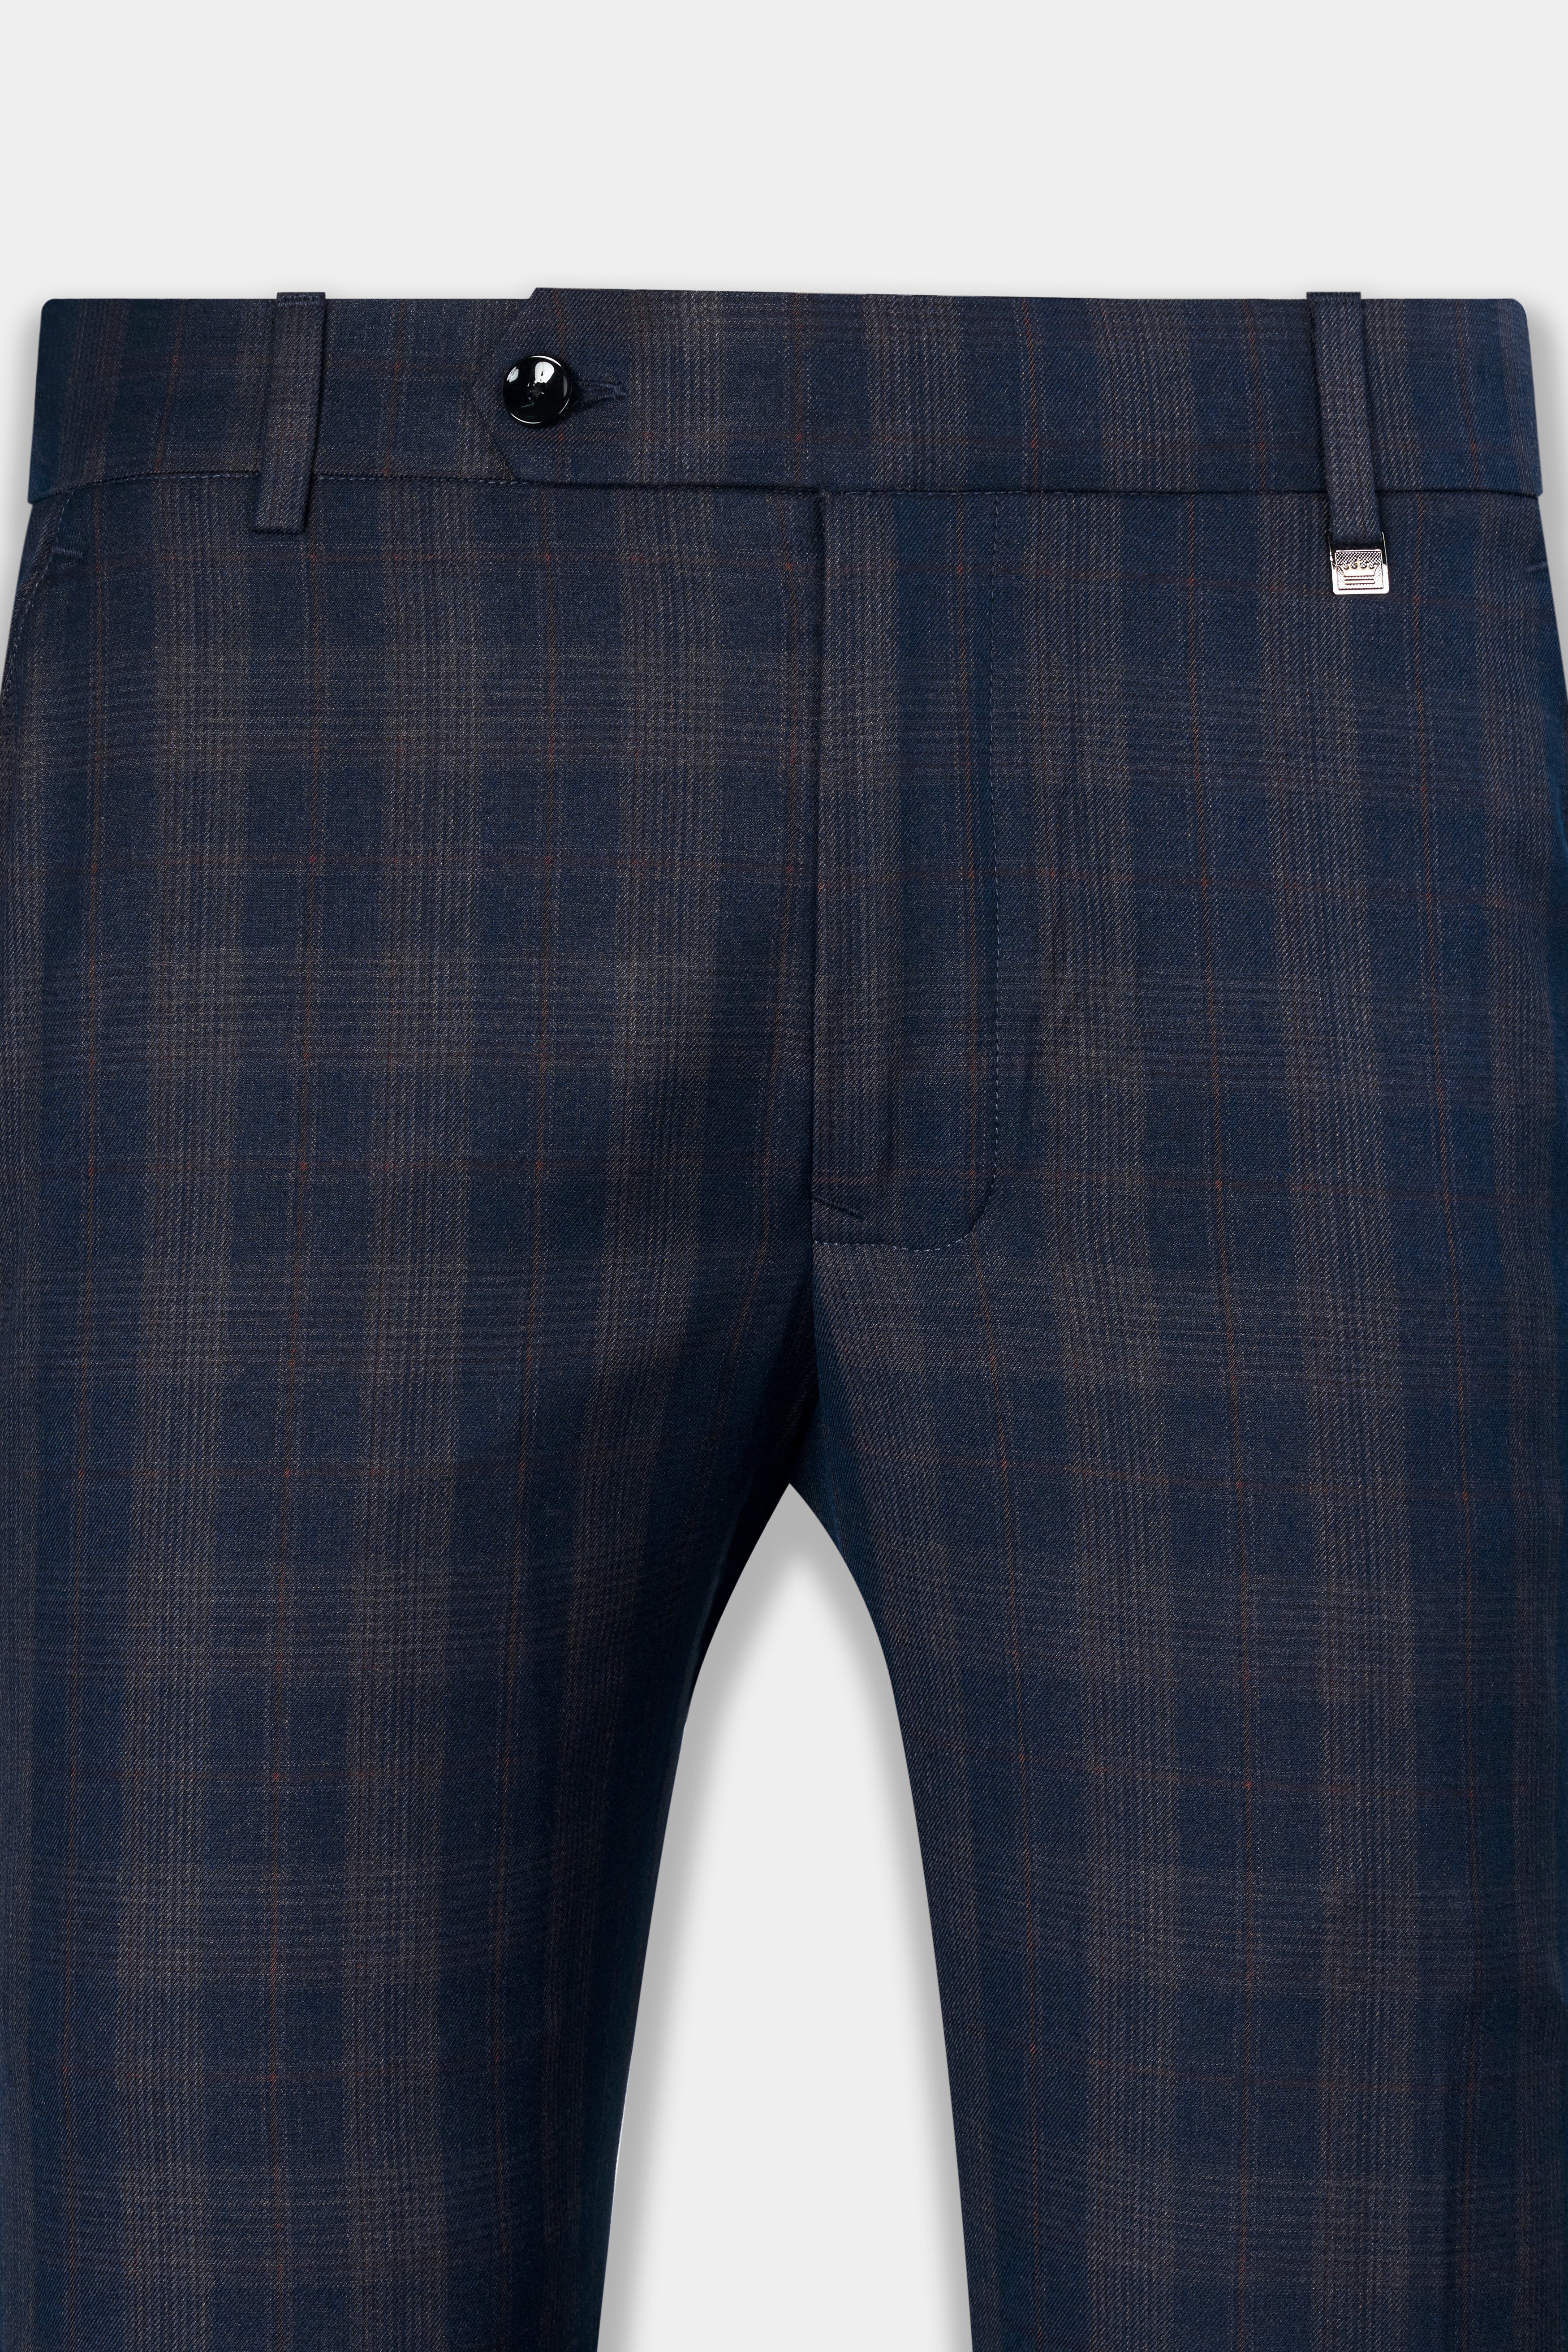 Admiral Blue and Cinereous Brown Plaid Wool Rich Pant T2872-28, T2872-30, T2872-32, T2872-34, T2872-36, T2872-38, T2872-40, T2872-42, T2872-44